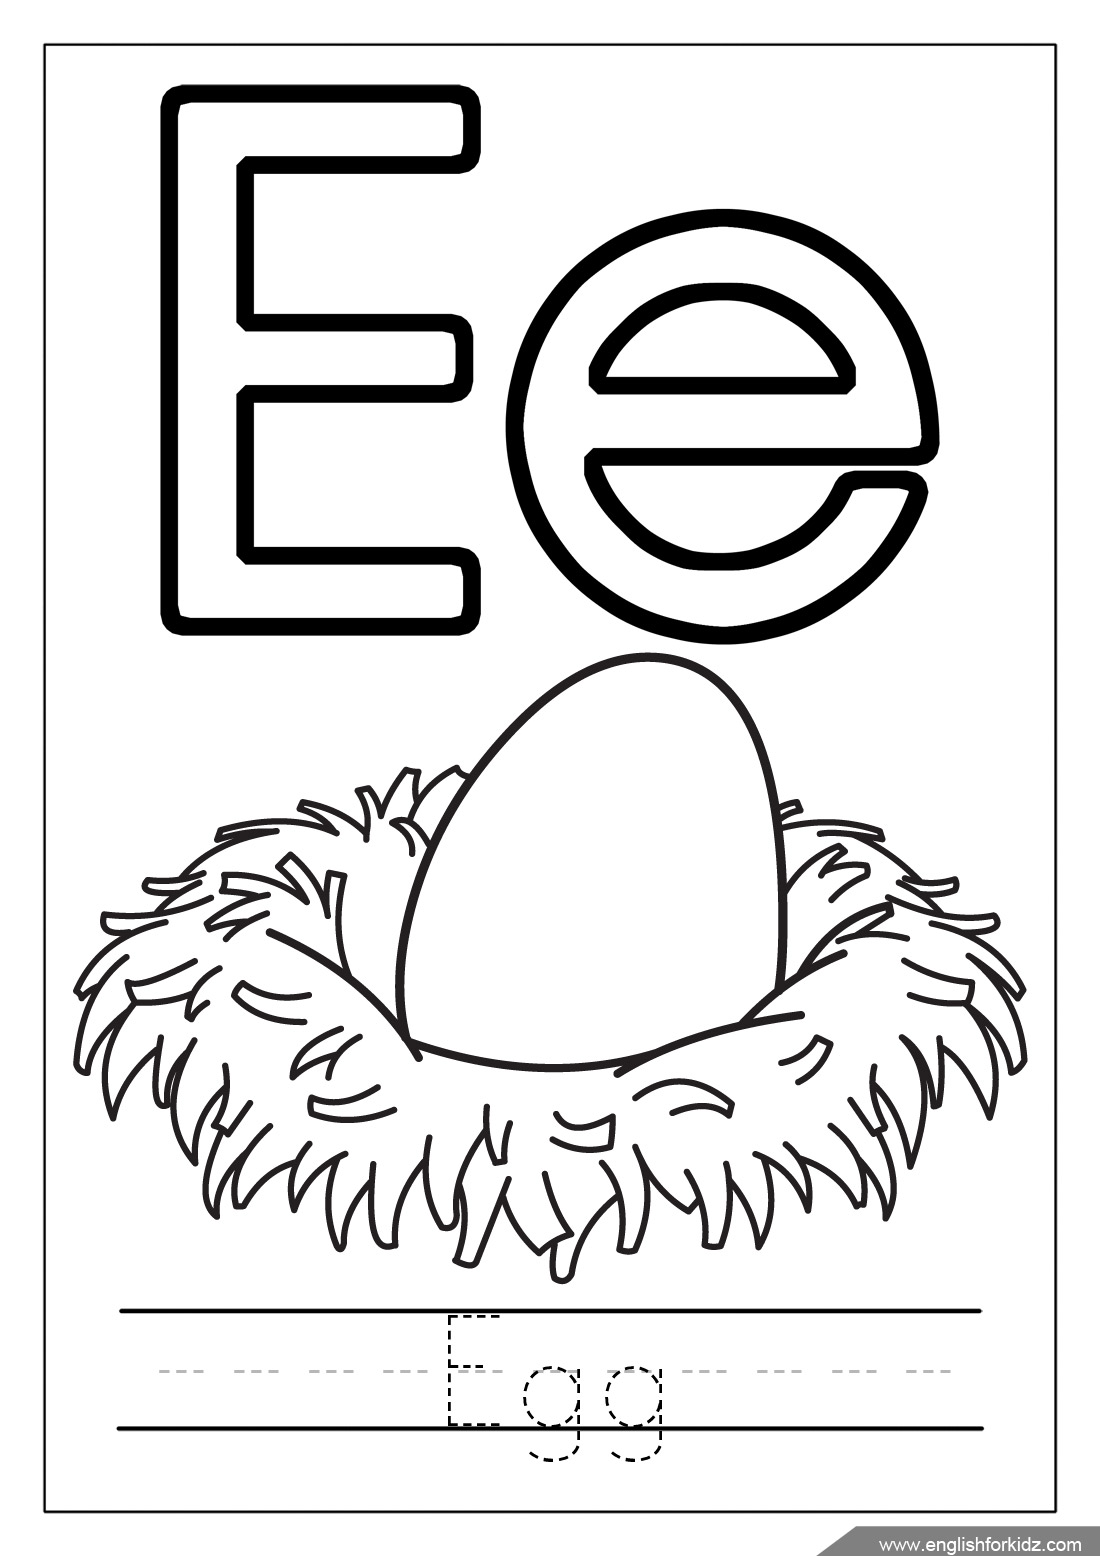 English for kids step by step letter e worksheets flash cards coloring pages